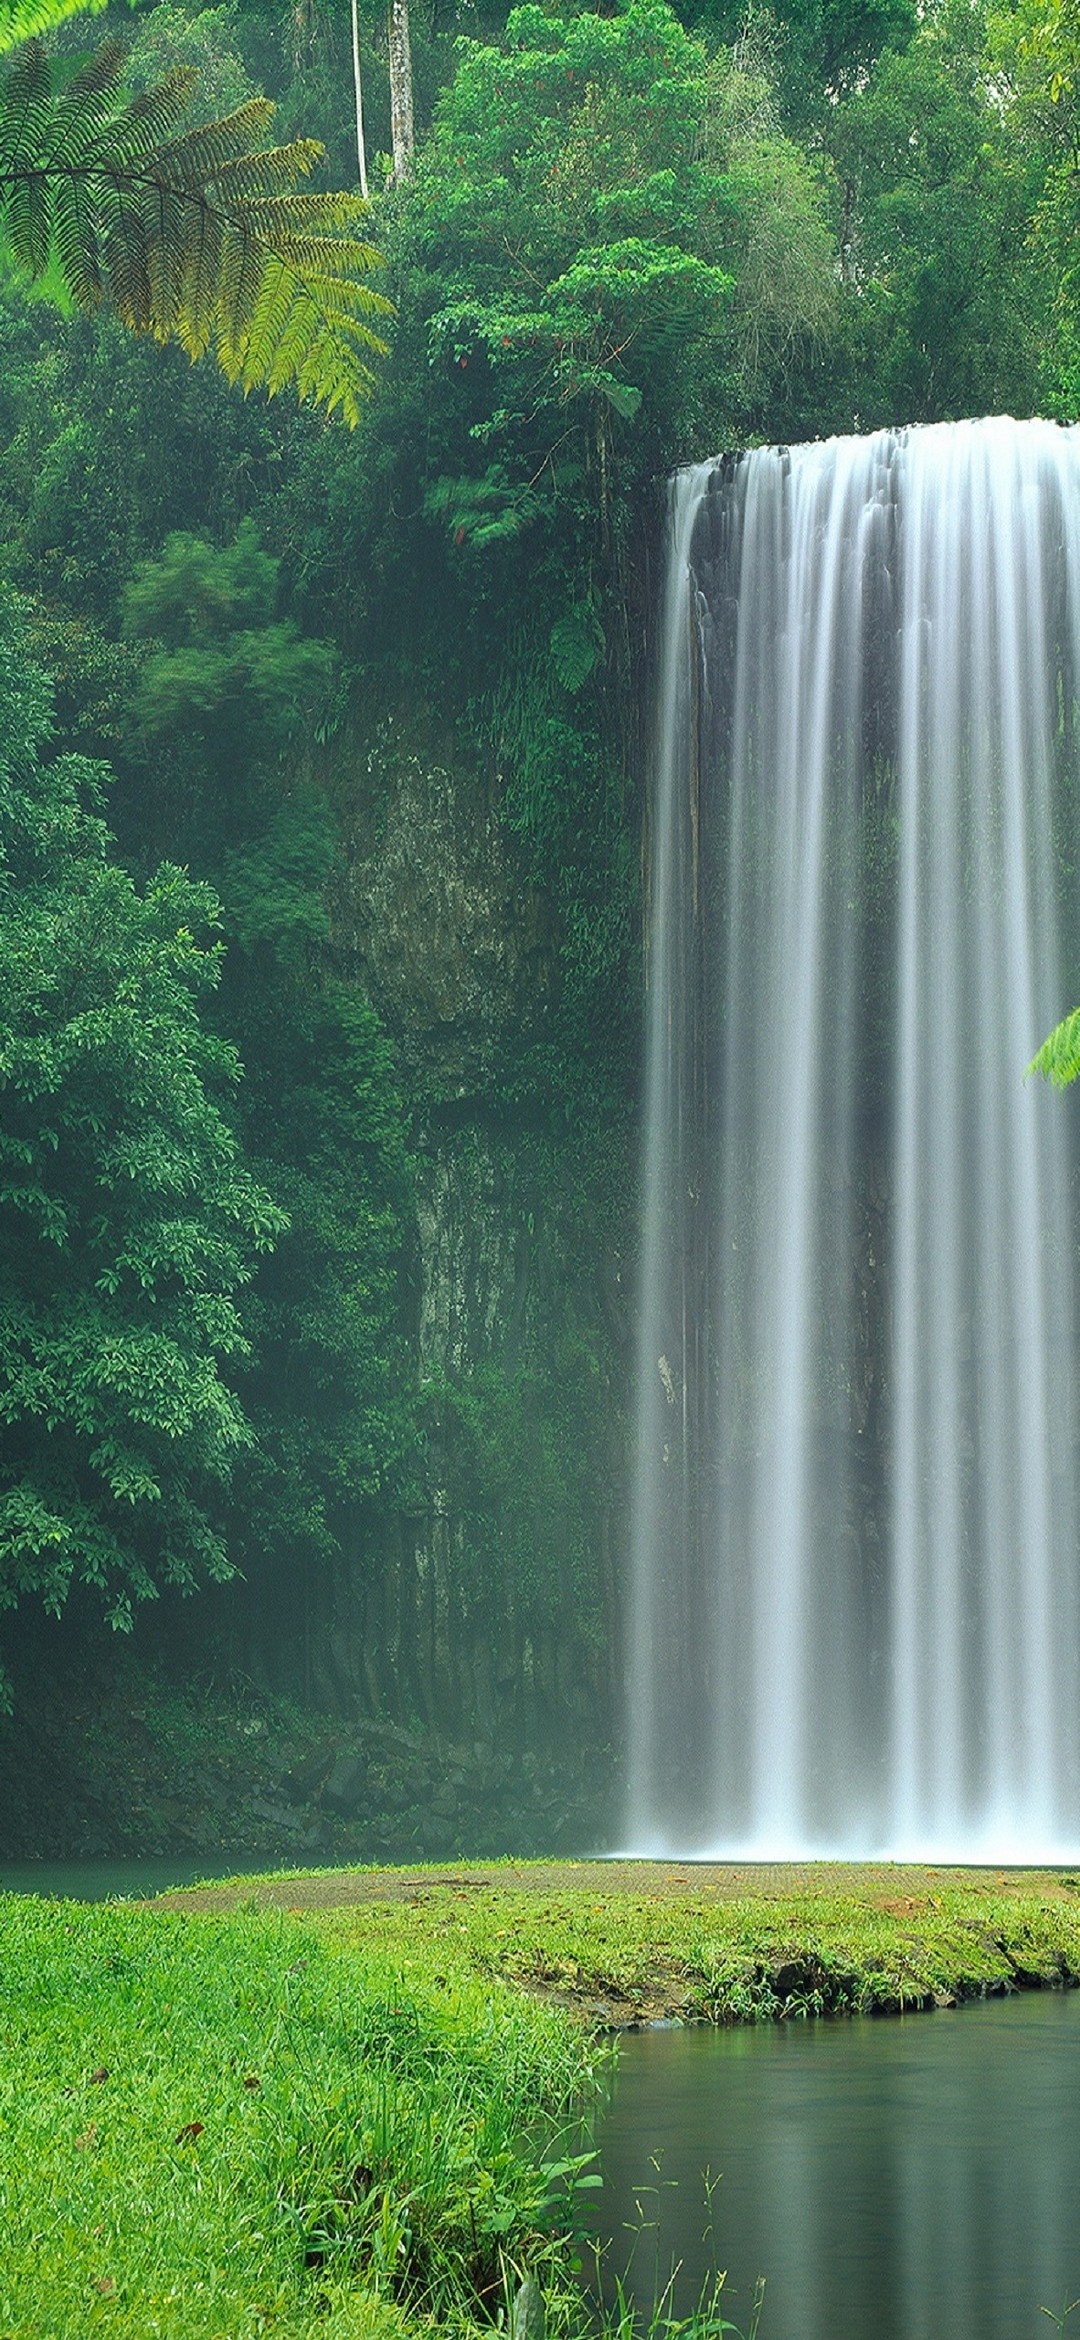 Waterfalls And Rivers Falling From High Places Redmi 9t Android スマホ壁紙 待ち受け スマラン